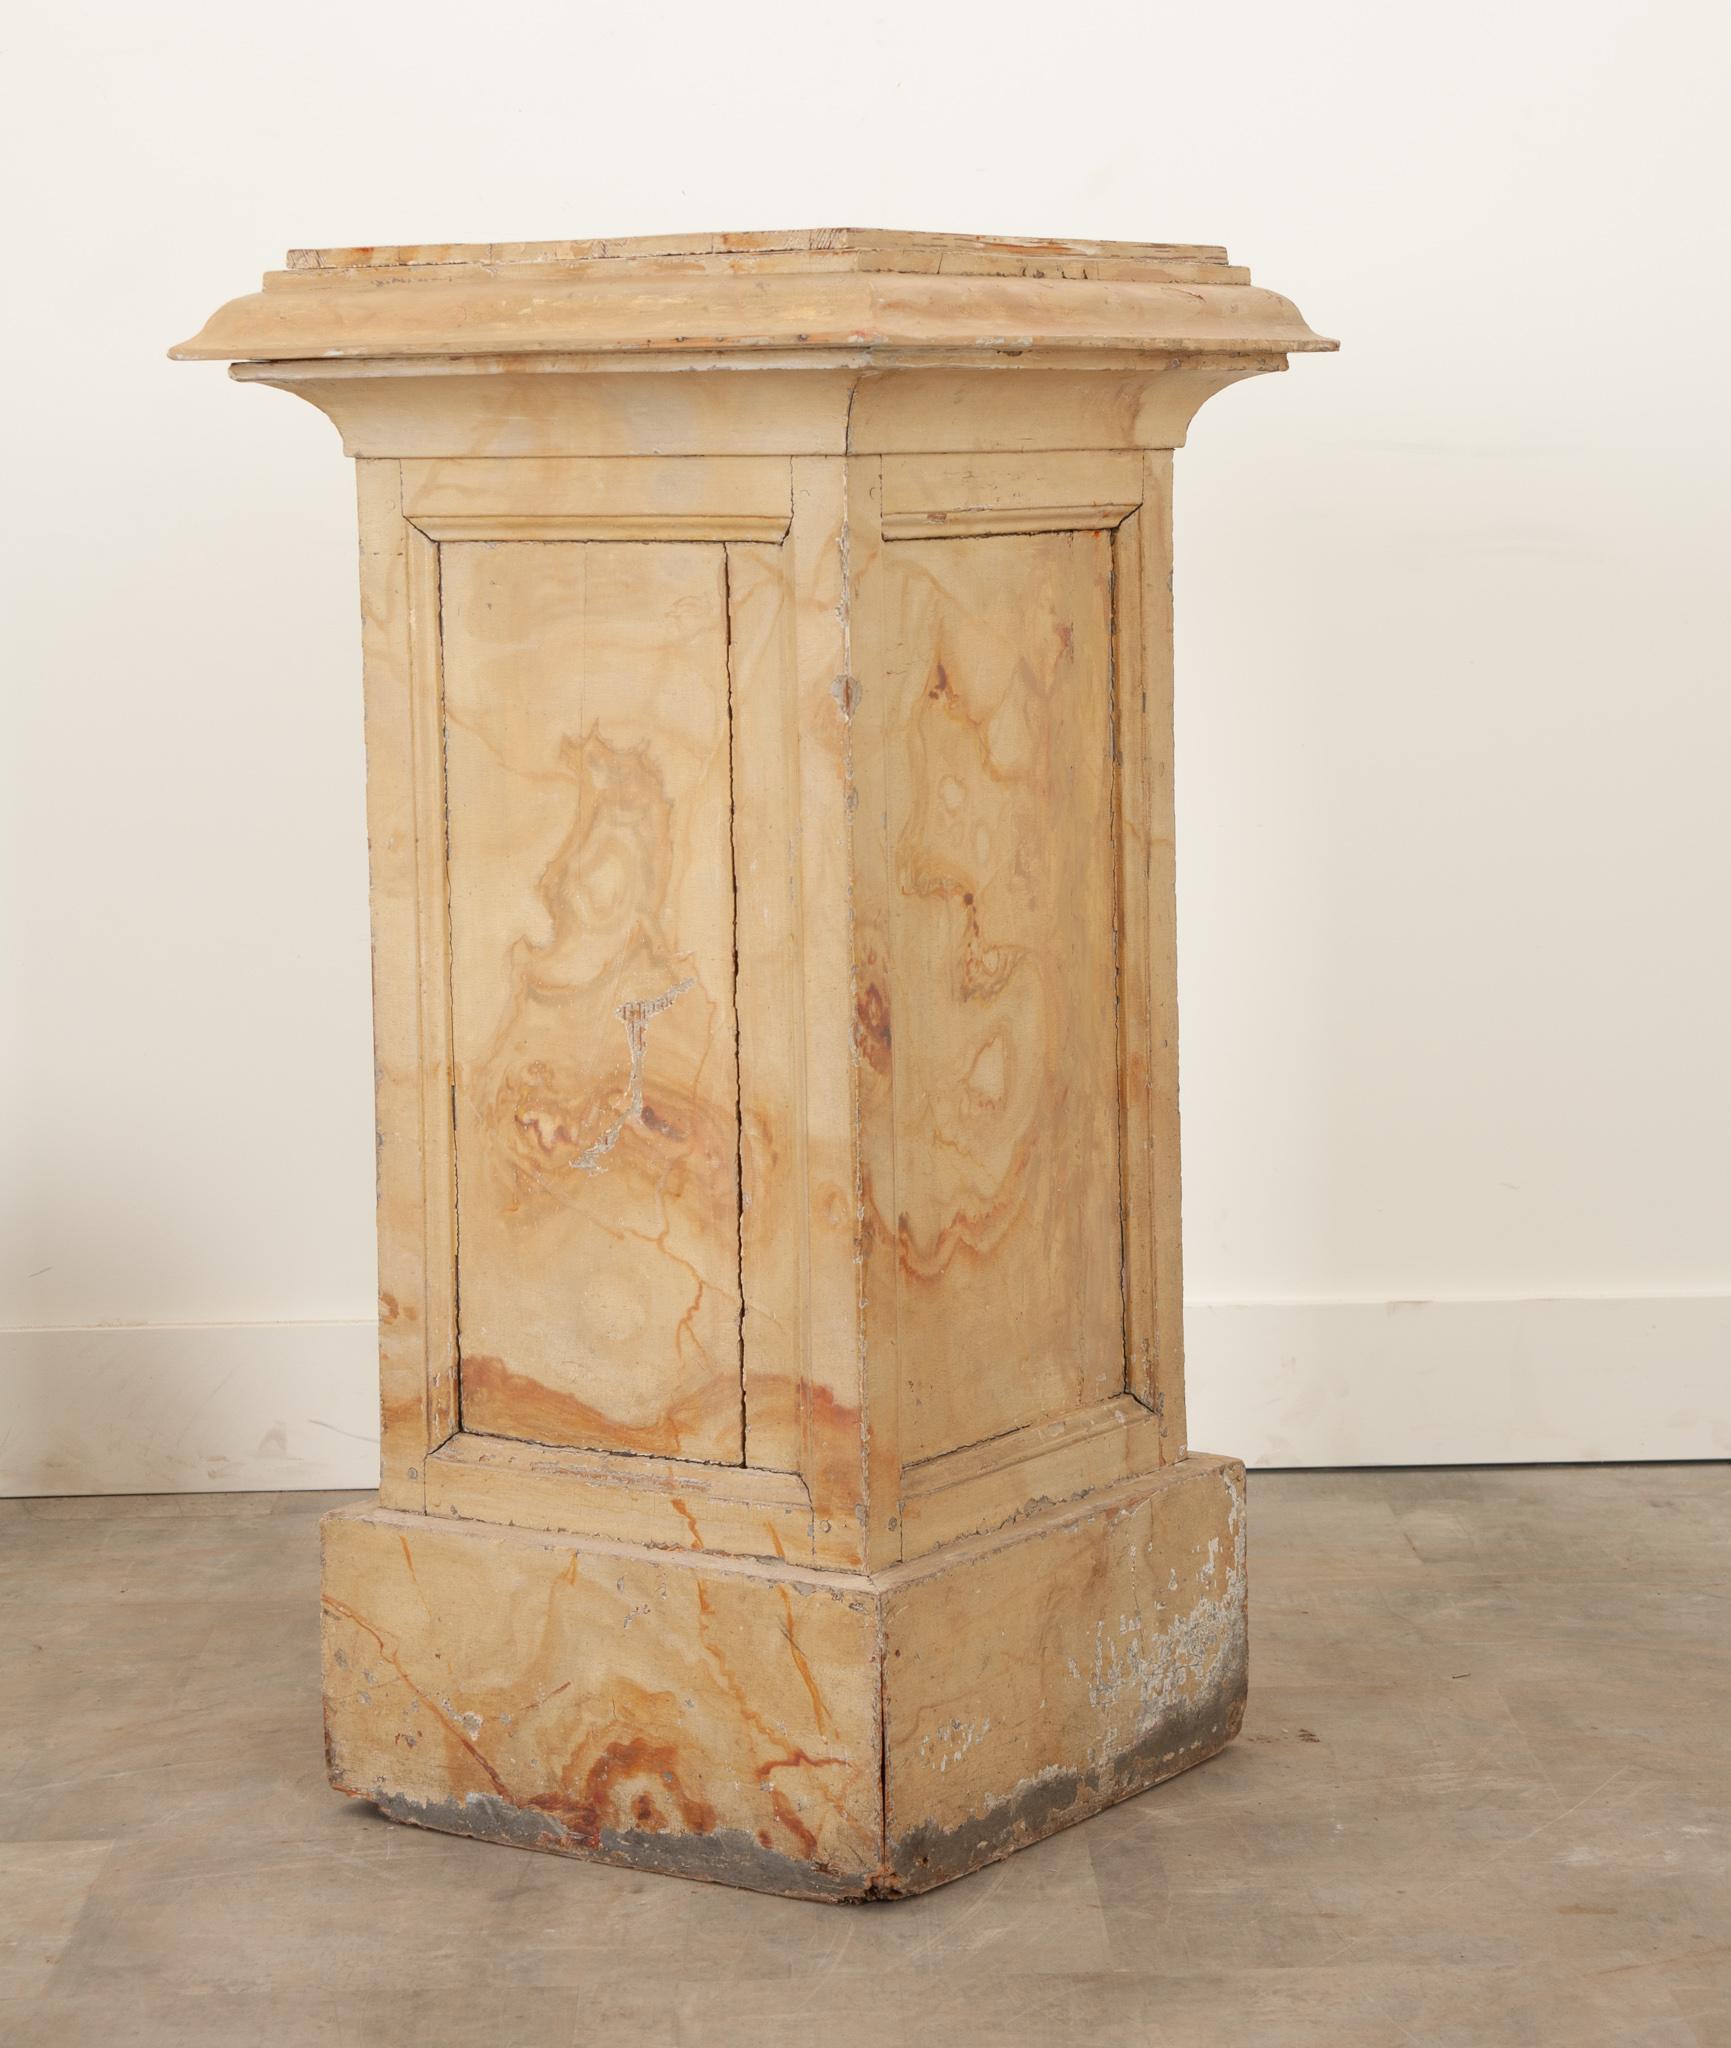 This colorful yellow, faux marble, paneled pedestal is a delightful size and very sturdy. It’s worn in all the right places and brings age and patina to any interior. Perfect for housing a sculpture or plant and easy to use all over the house. Be